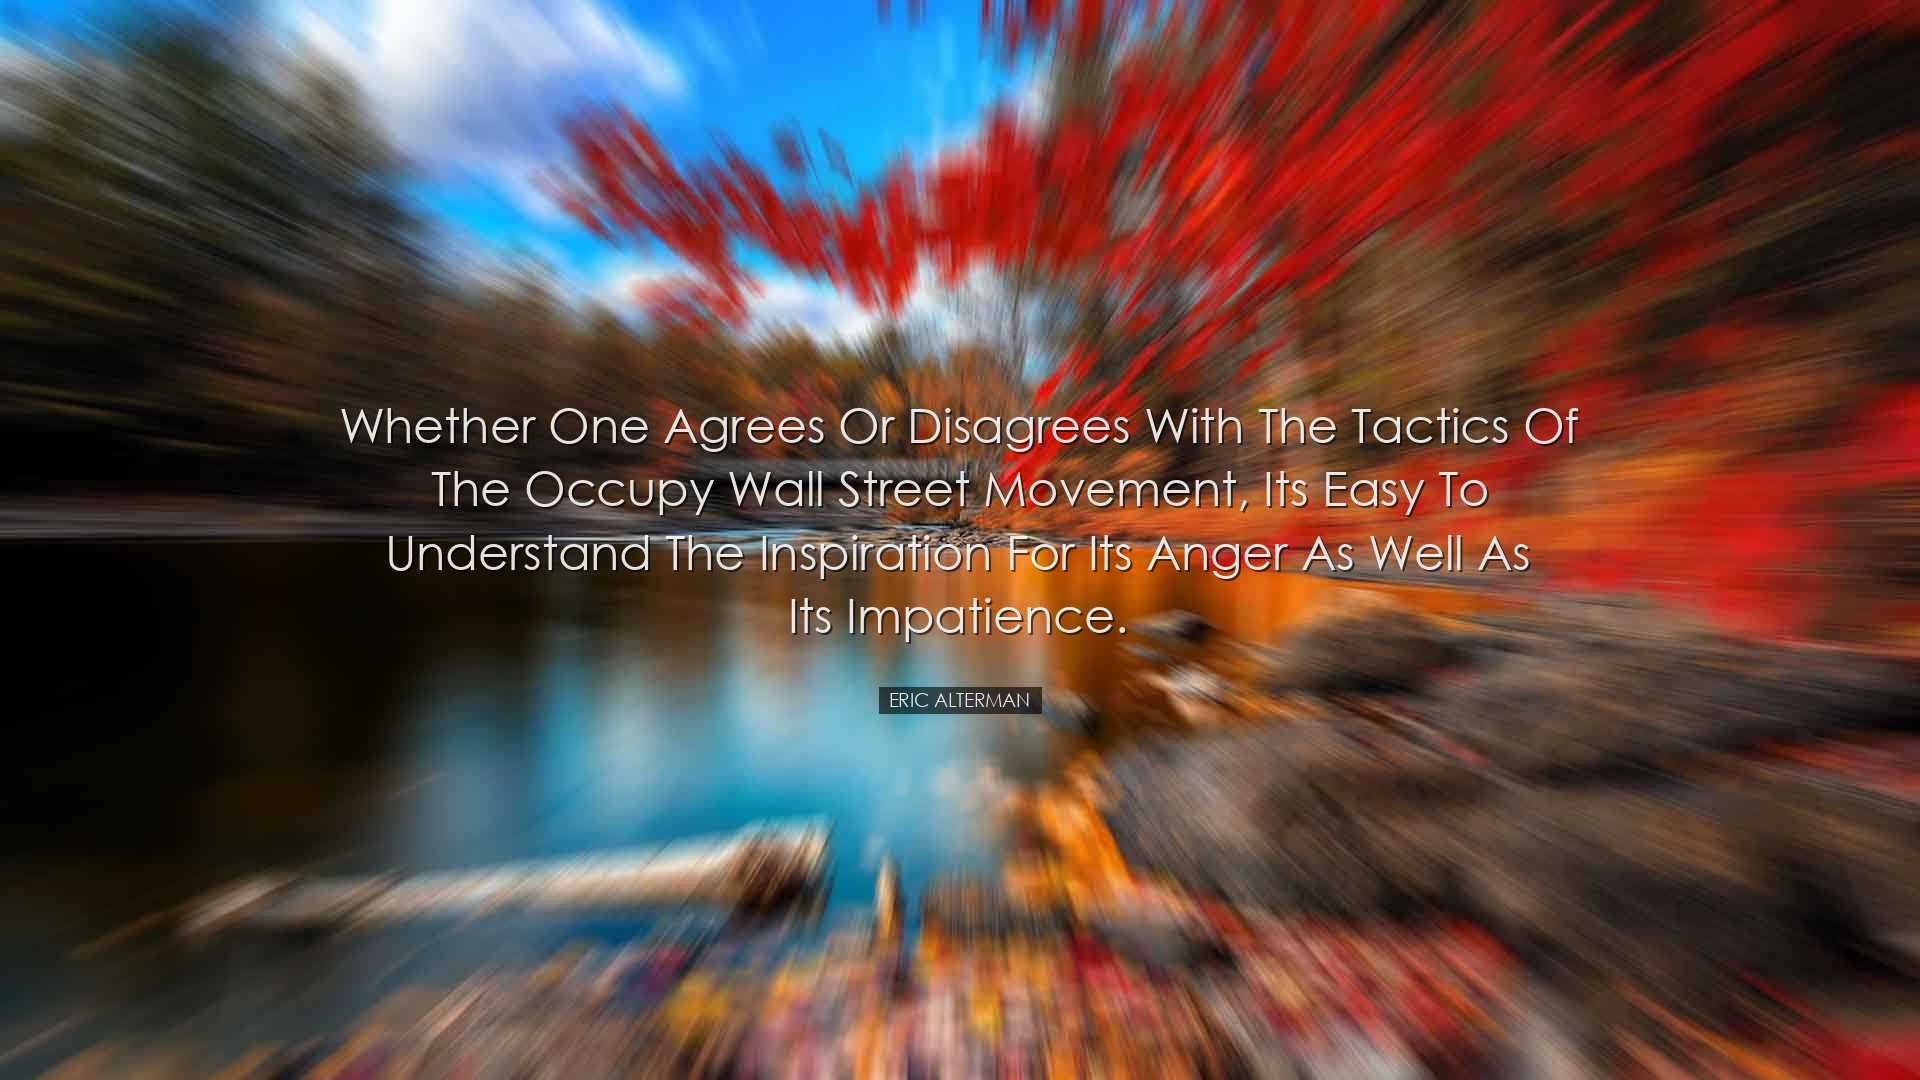 Whether one agrees or disagrees with the tactics of the Occupy Wal